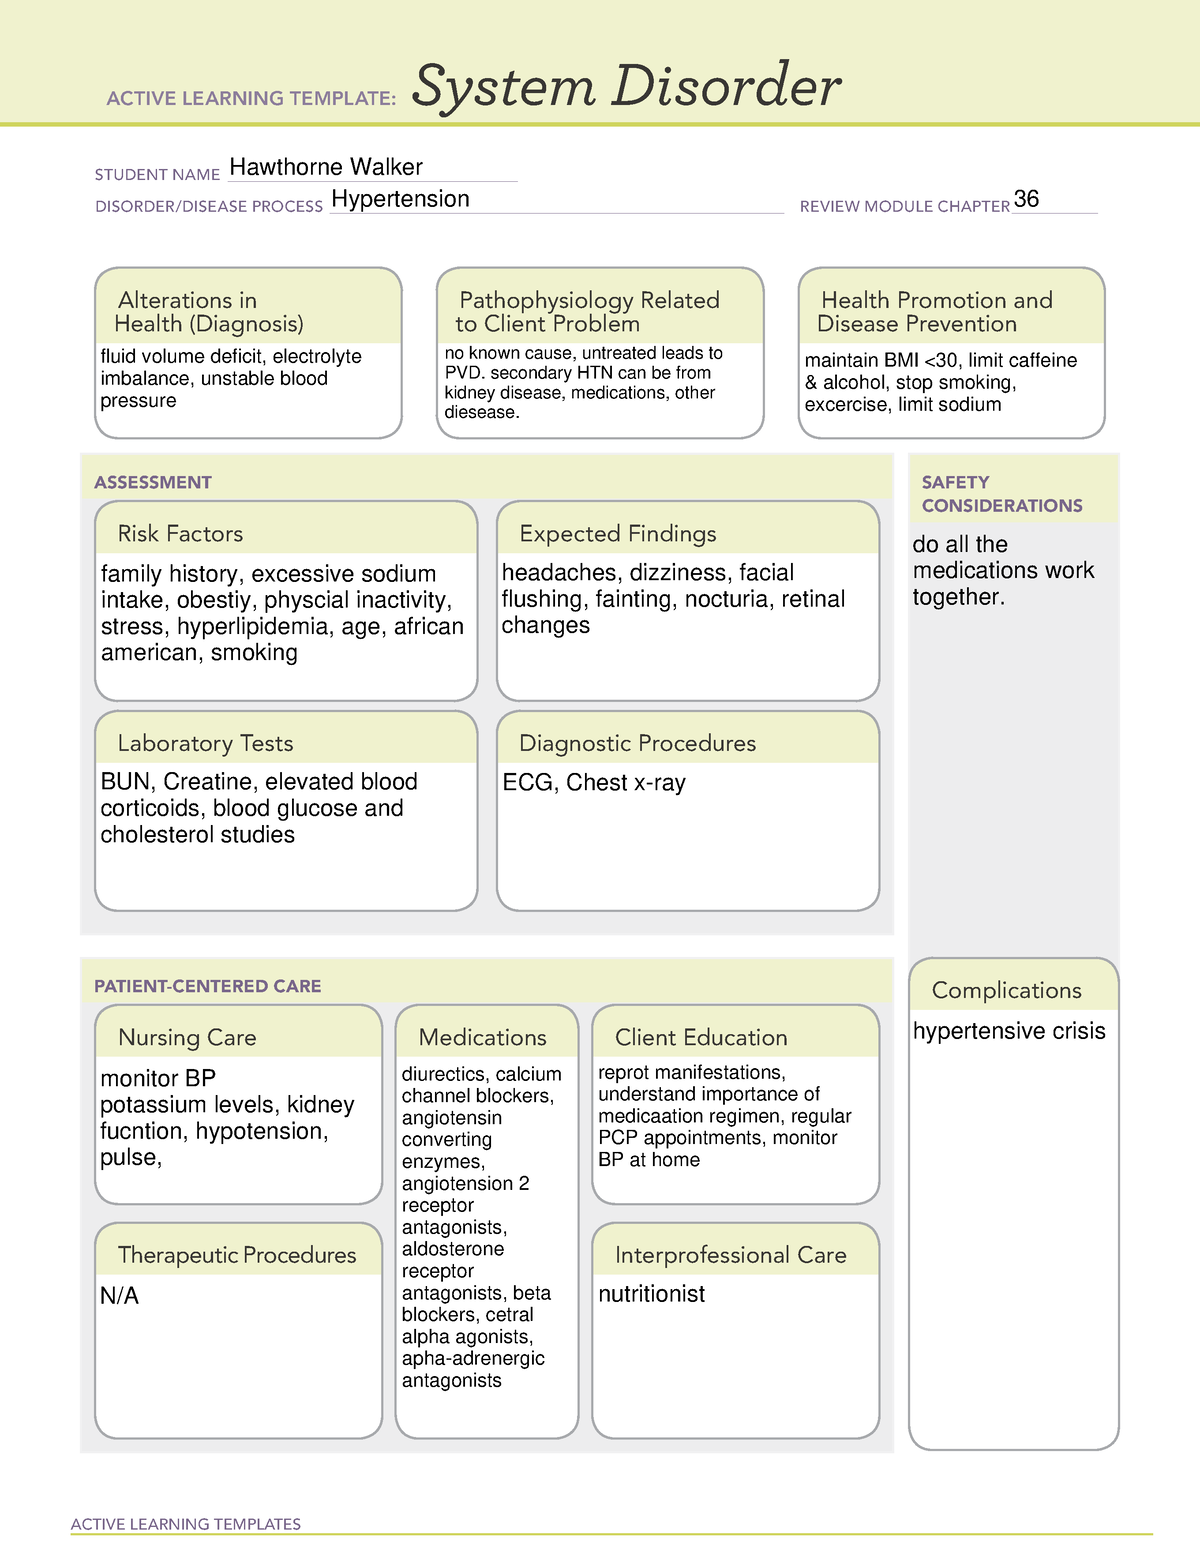 Hypertension ATI system disorder template ACTIVE LEARNING TEMPLATES